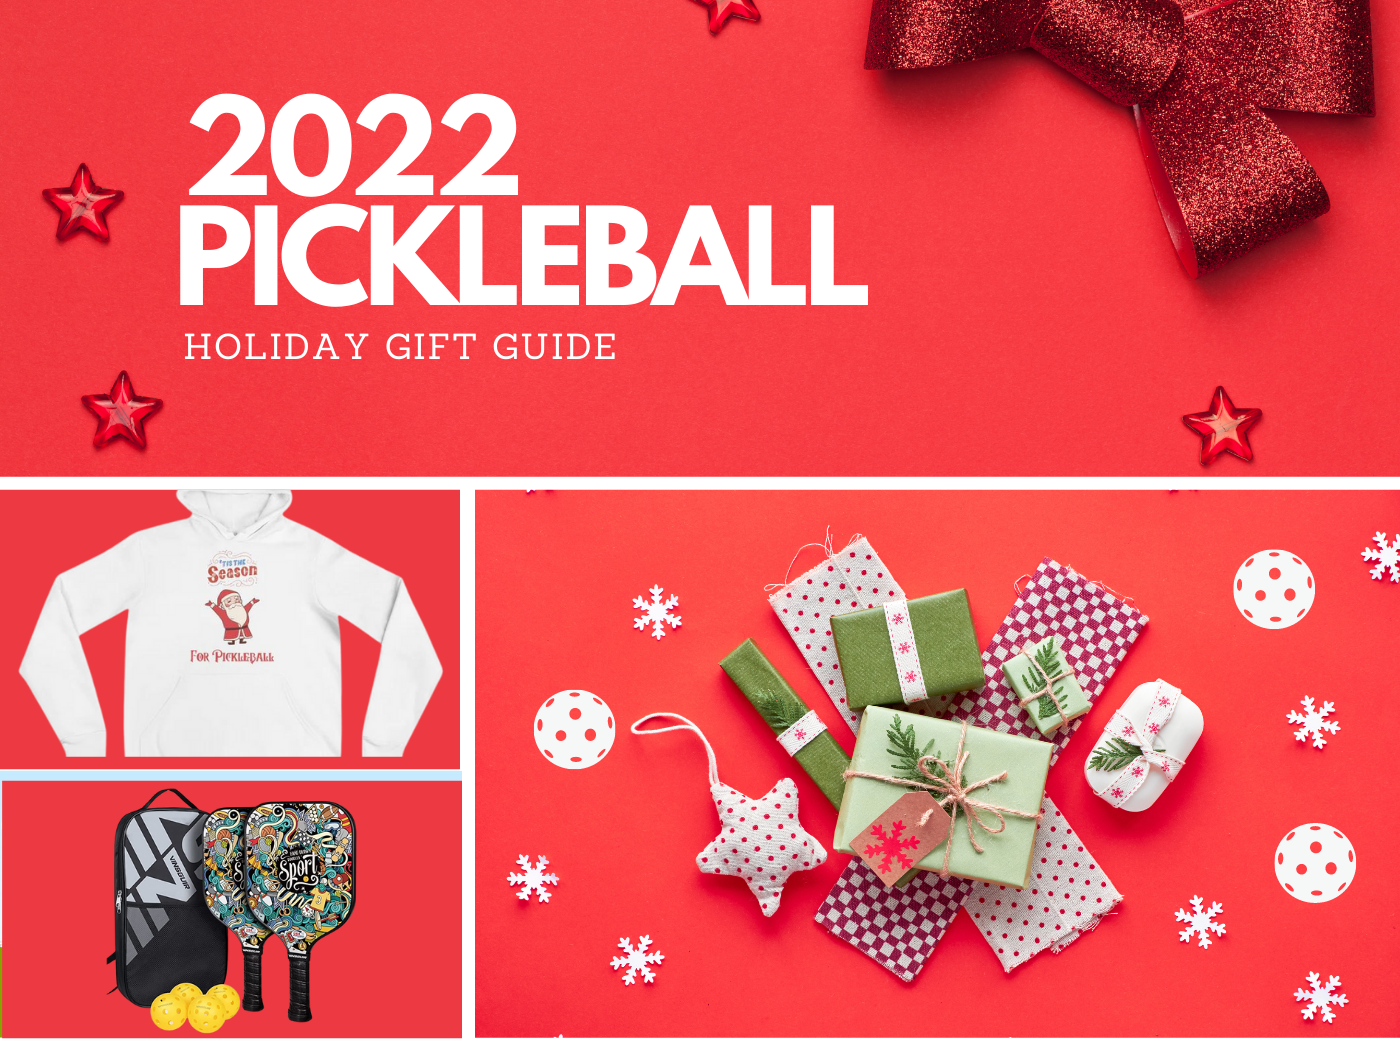 Best Pickleball Gifts: 2022 Pickleball Holiday Gift Guide